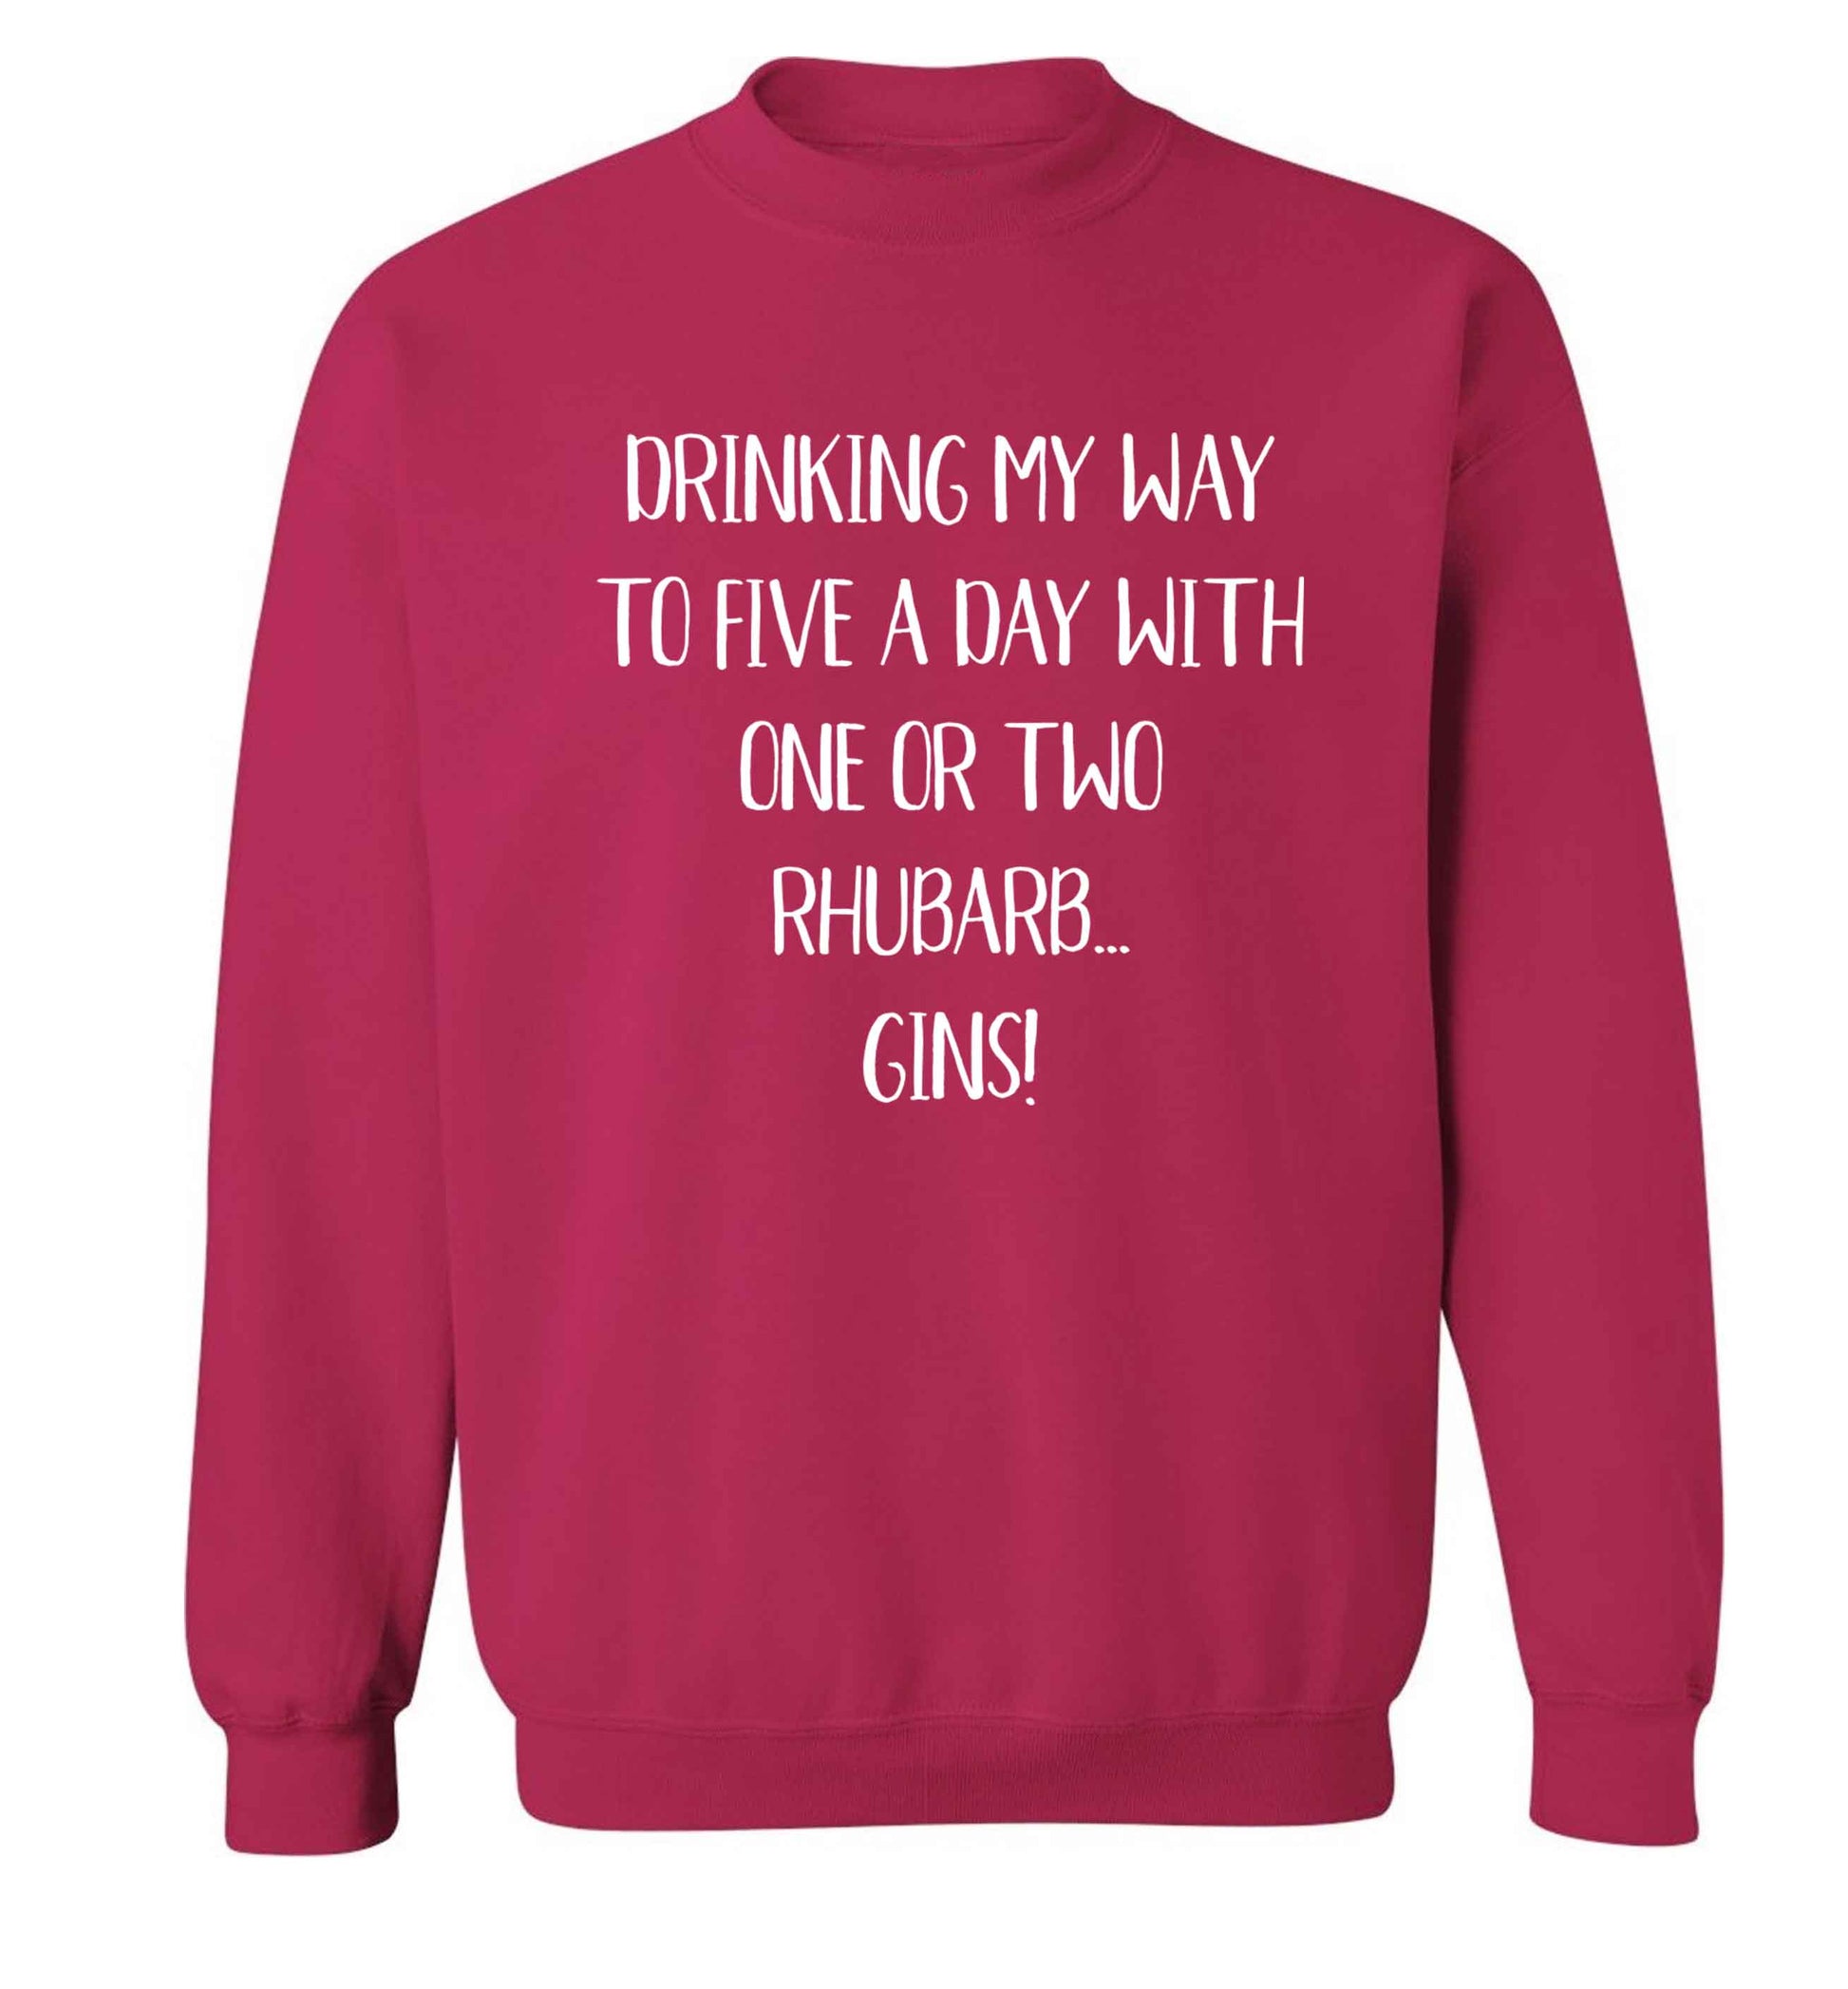 Drinking my way to five a day with one or two rhubarb gins Adult's unisex pink Sweater 2XL